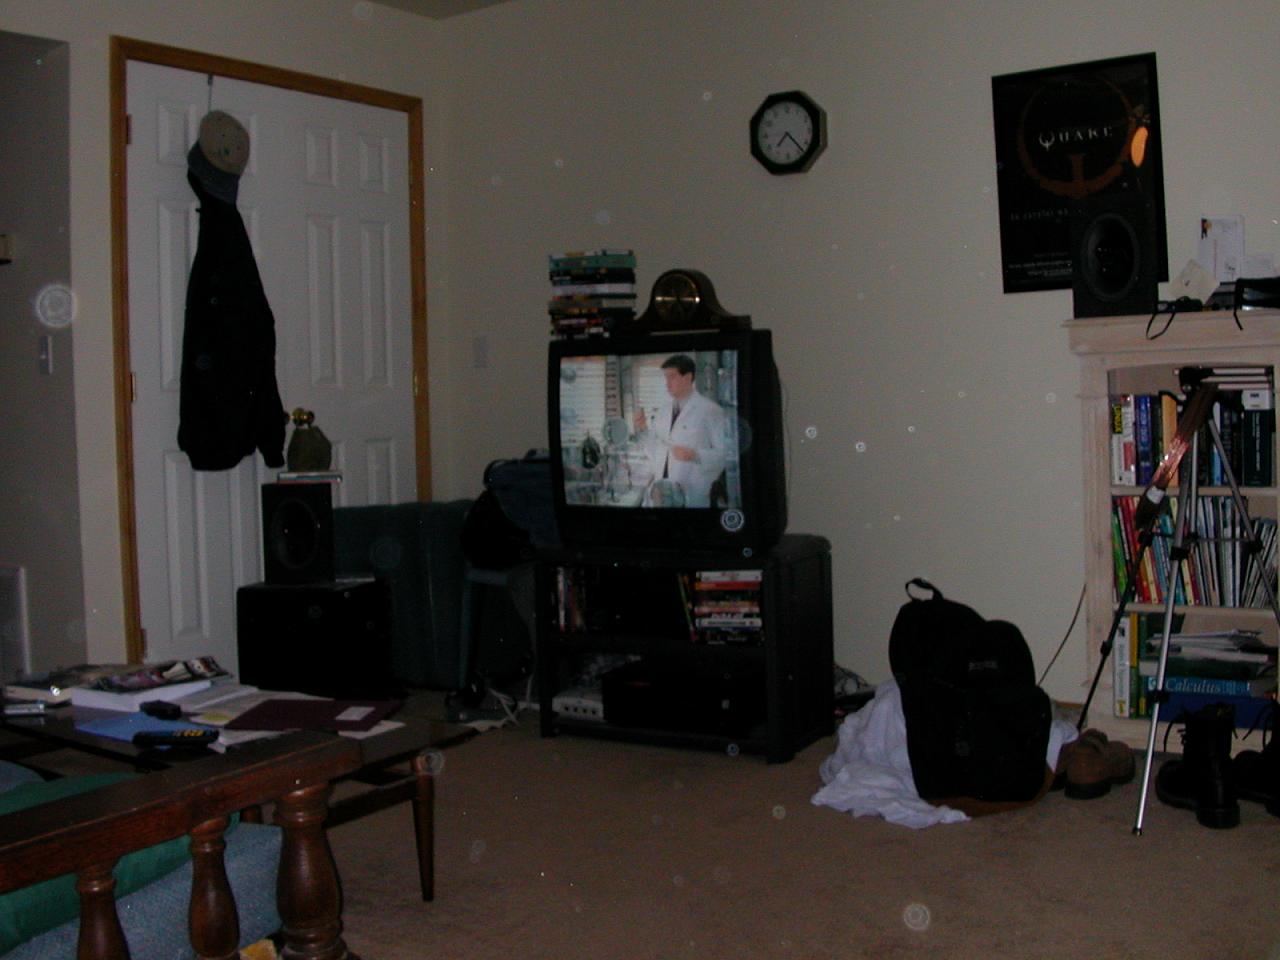 The theater room.  I mean TV in the living room. The spots happen from the camera from time to time for some reason.